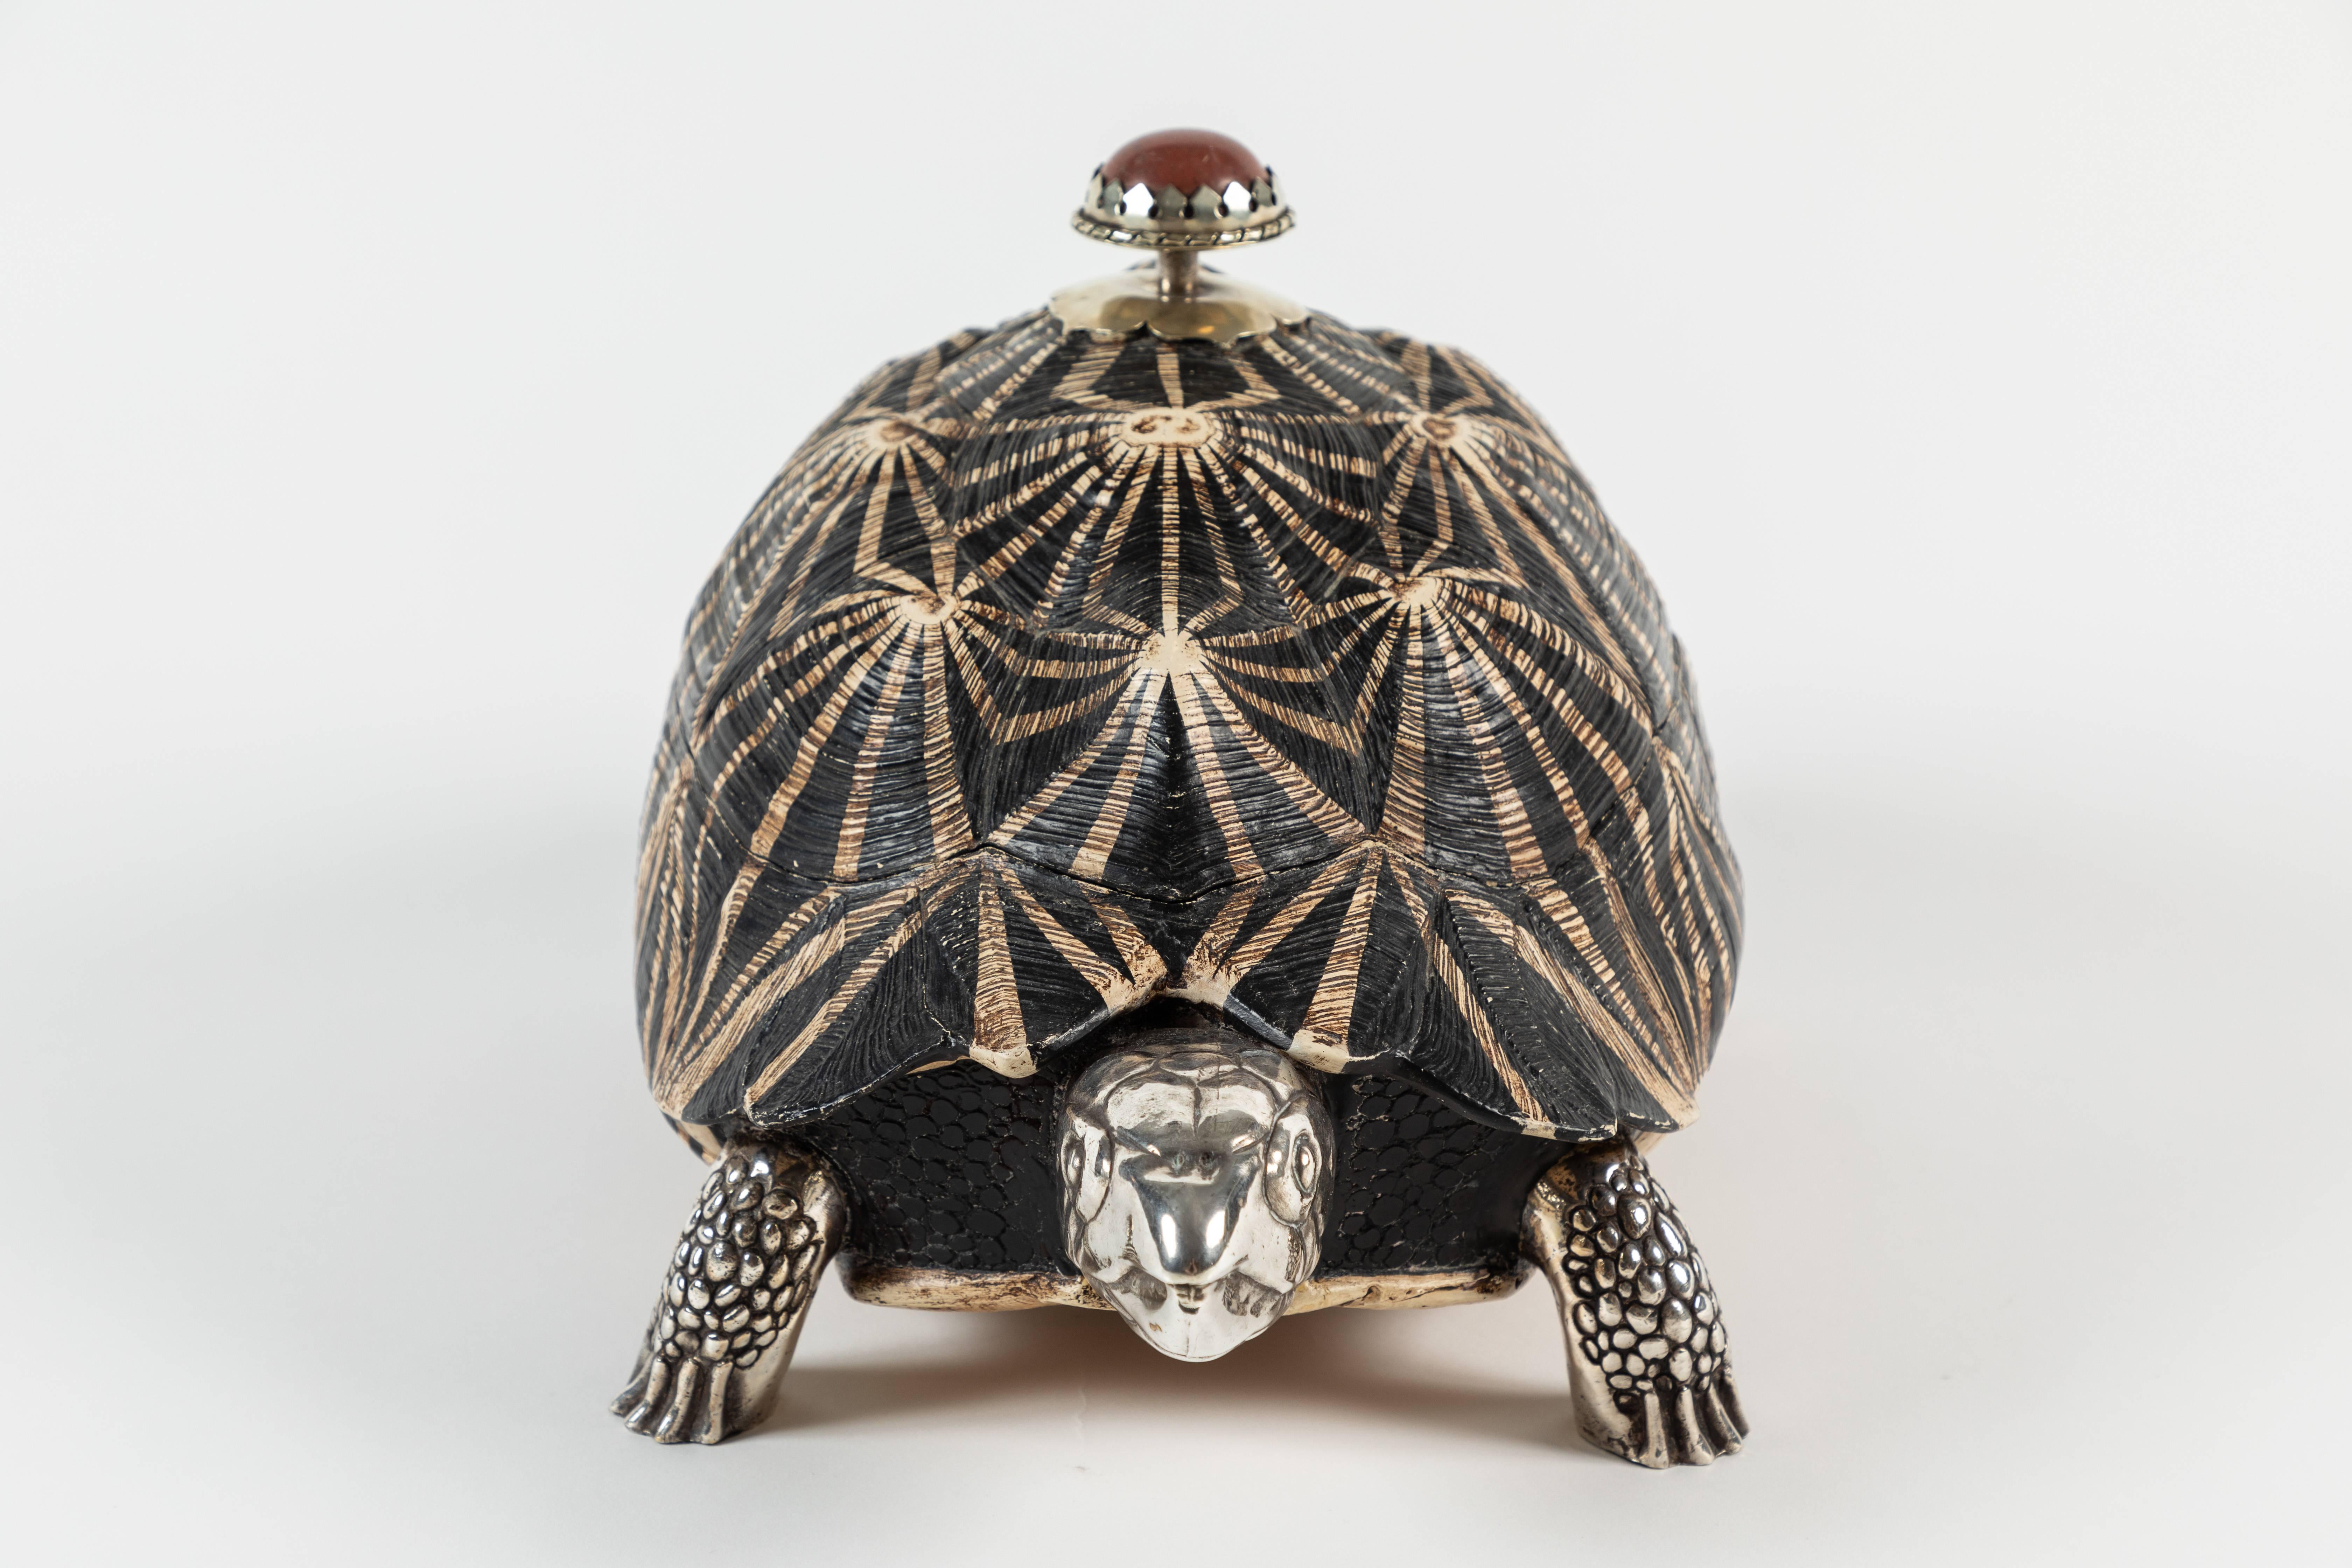 Realistically cast large resin and silver plate turtle box by English designer Anthony Redmile. The shell features a realistic texture and a black and white geometric design. the legs and head cast in silver plated metal are also very convincingly